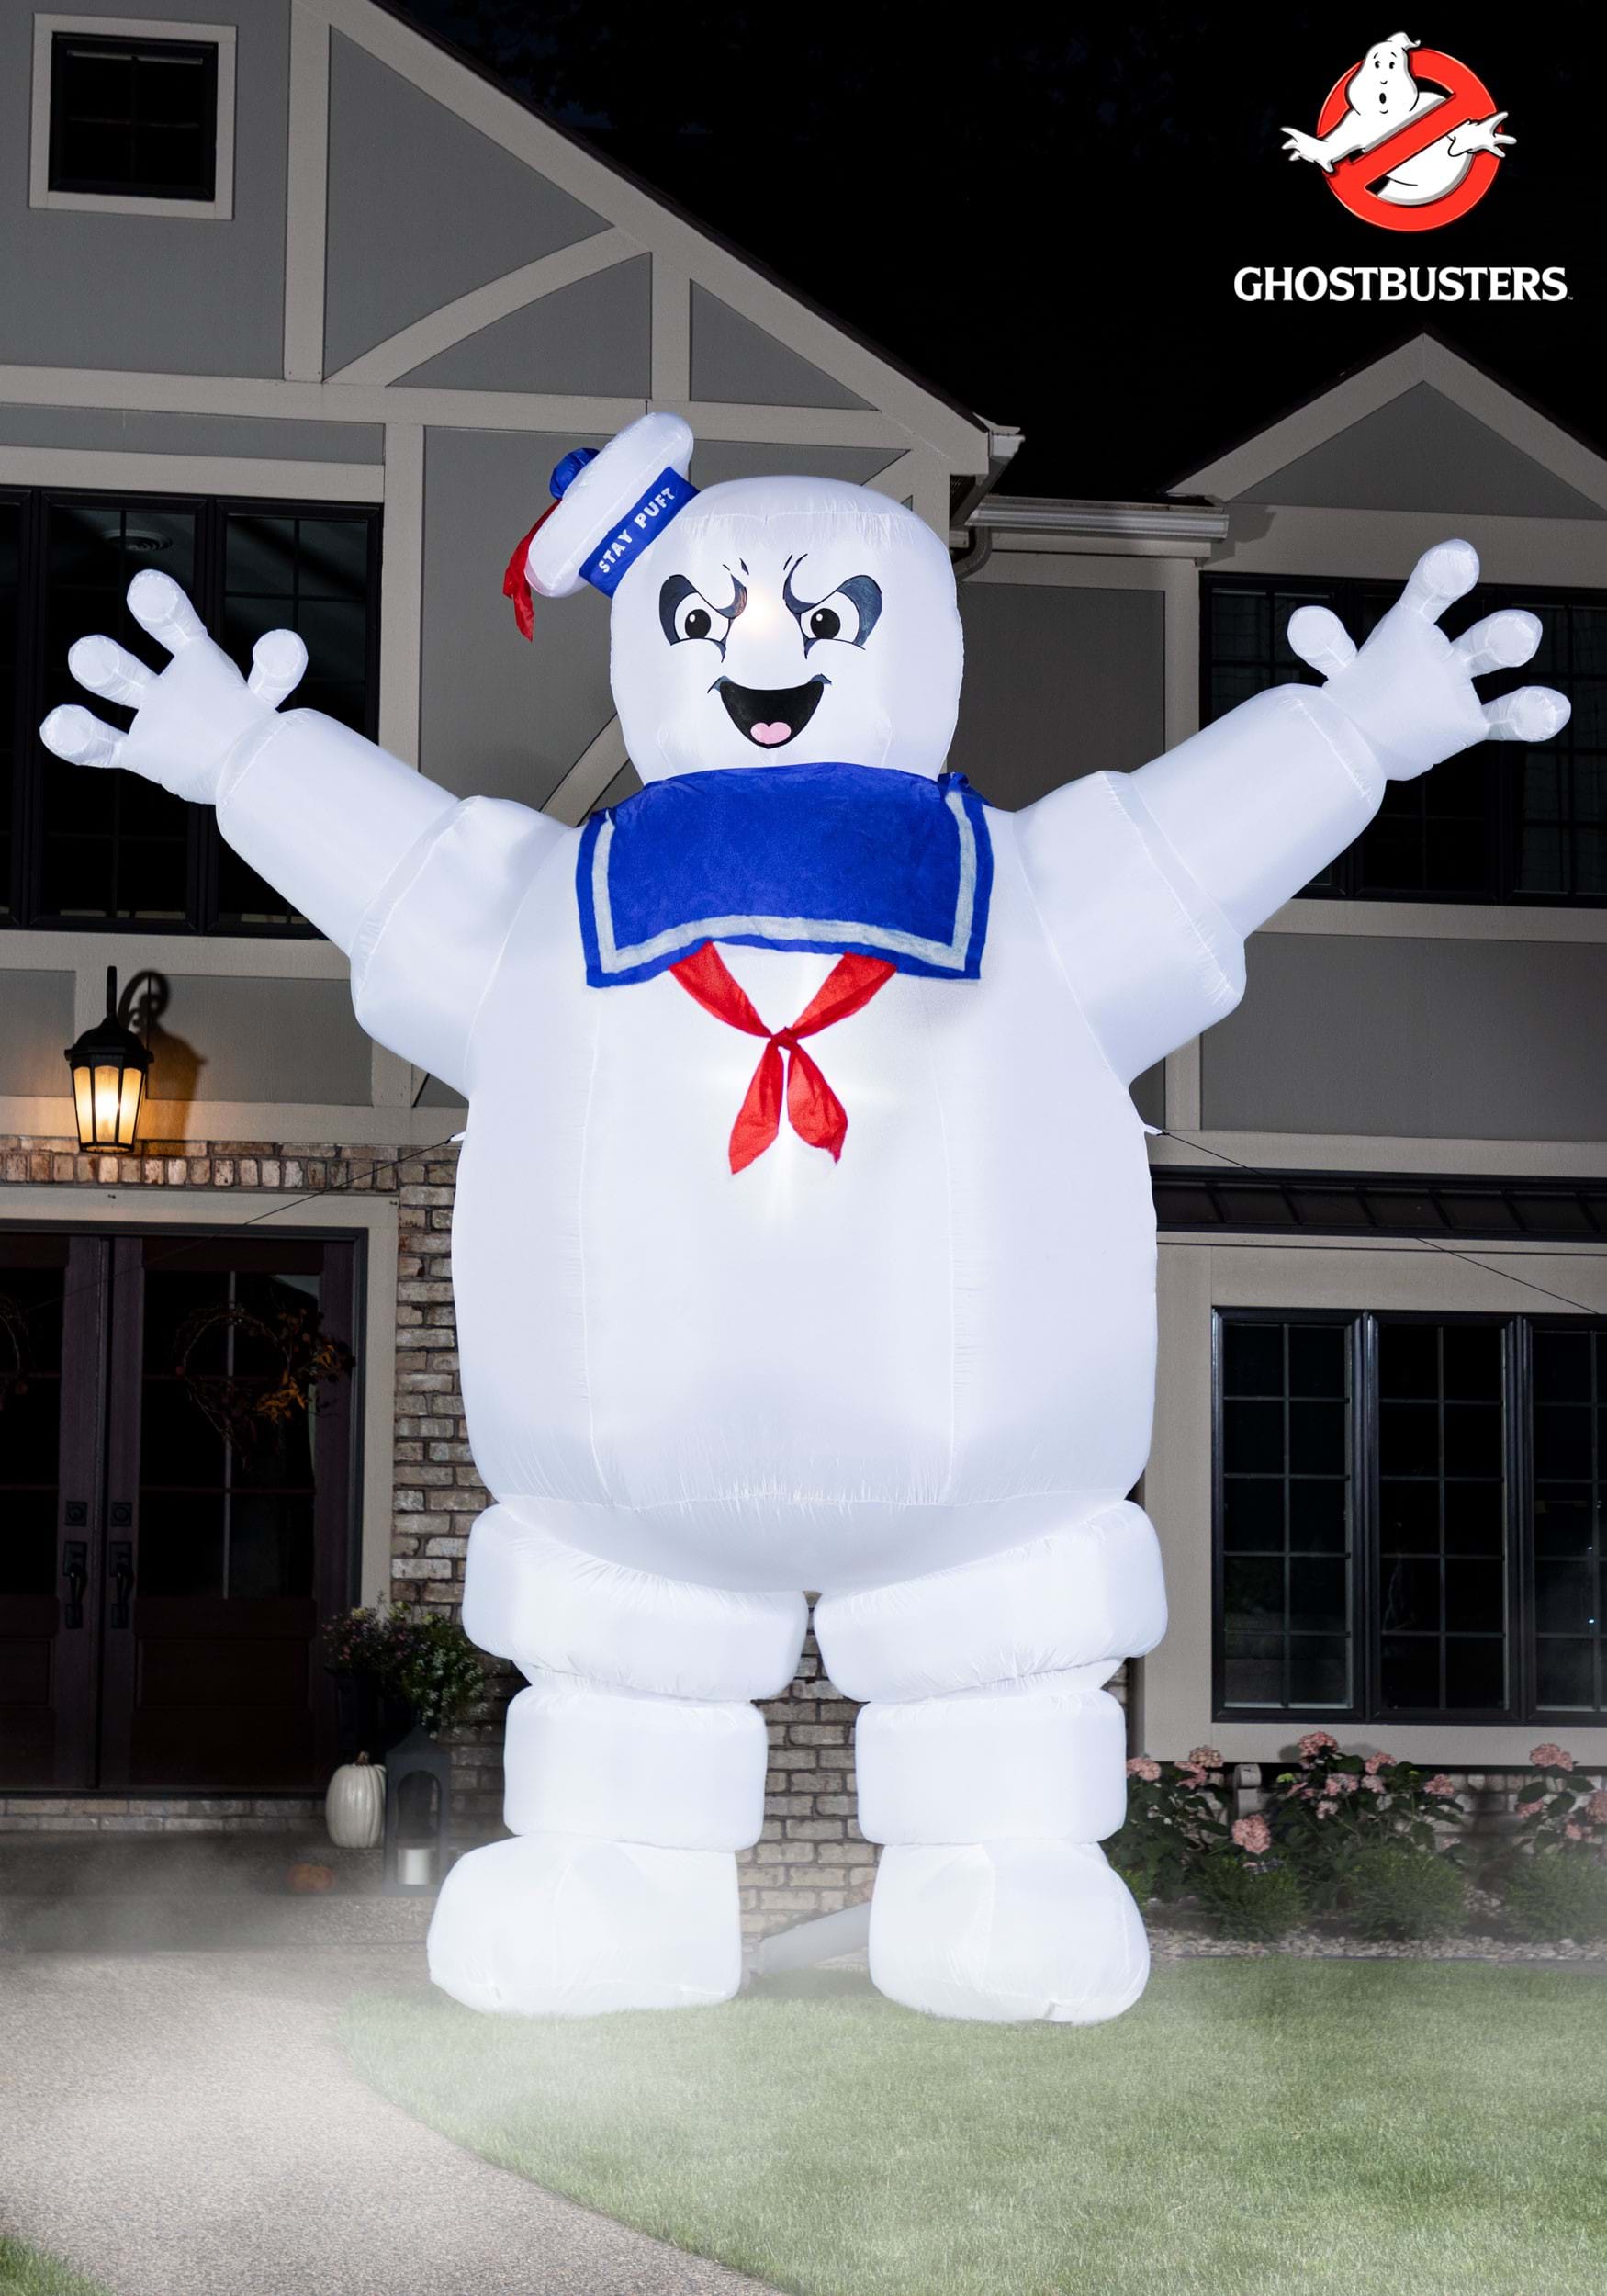 Ghostbusters 15FT Inflatable Stay Puft Marshmallow Man Decoration - Halloween Yard Decor